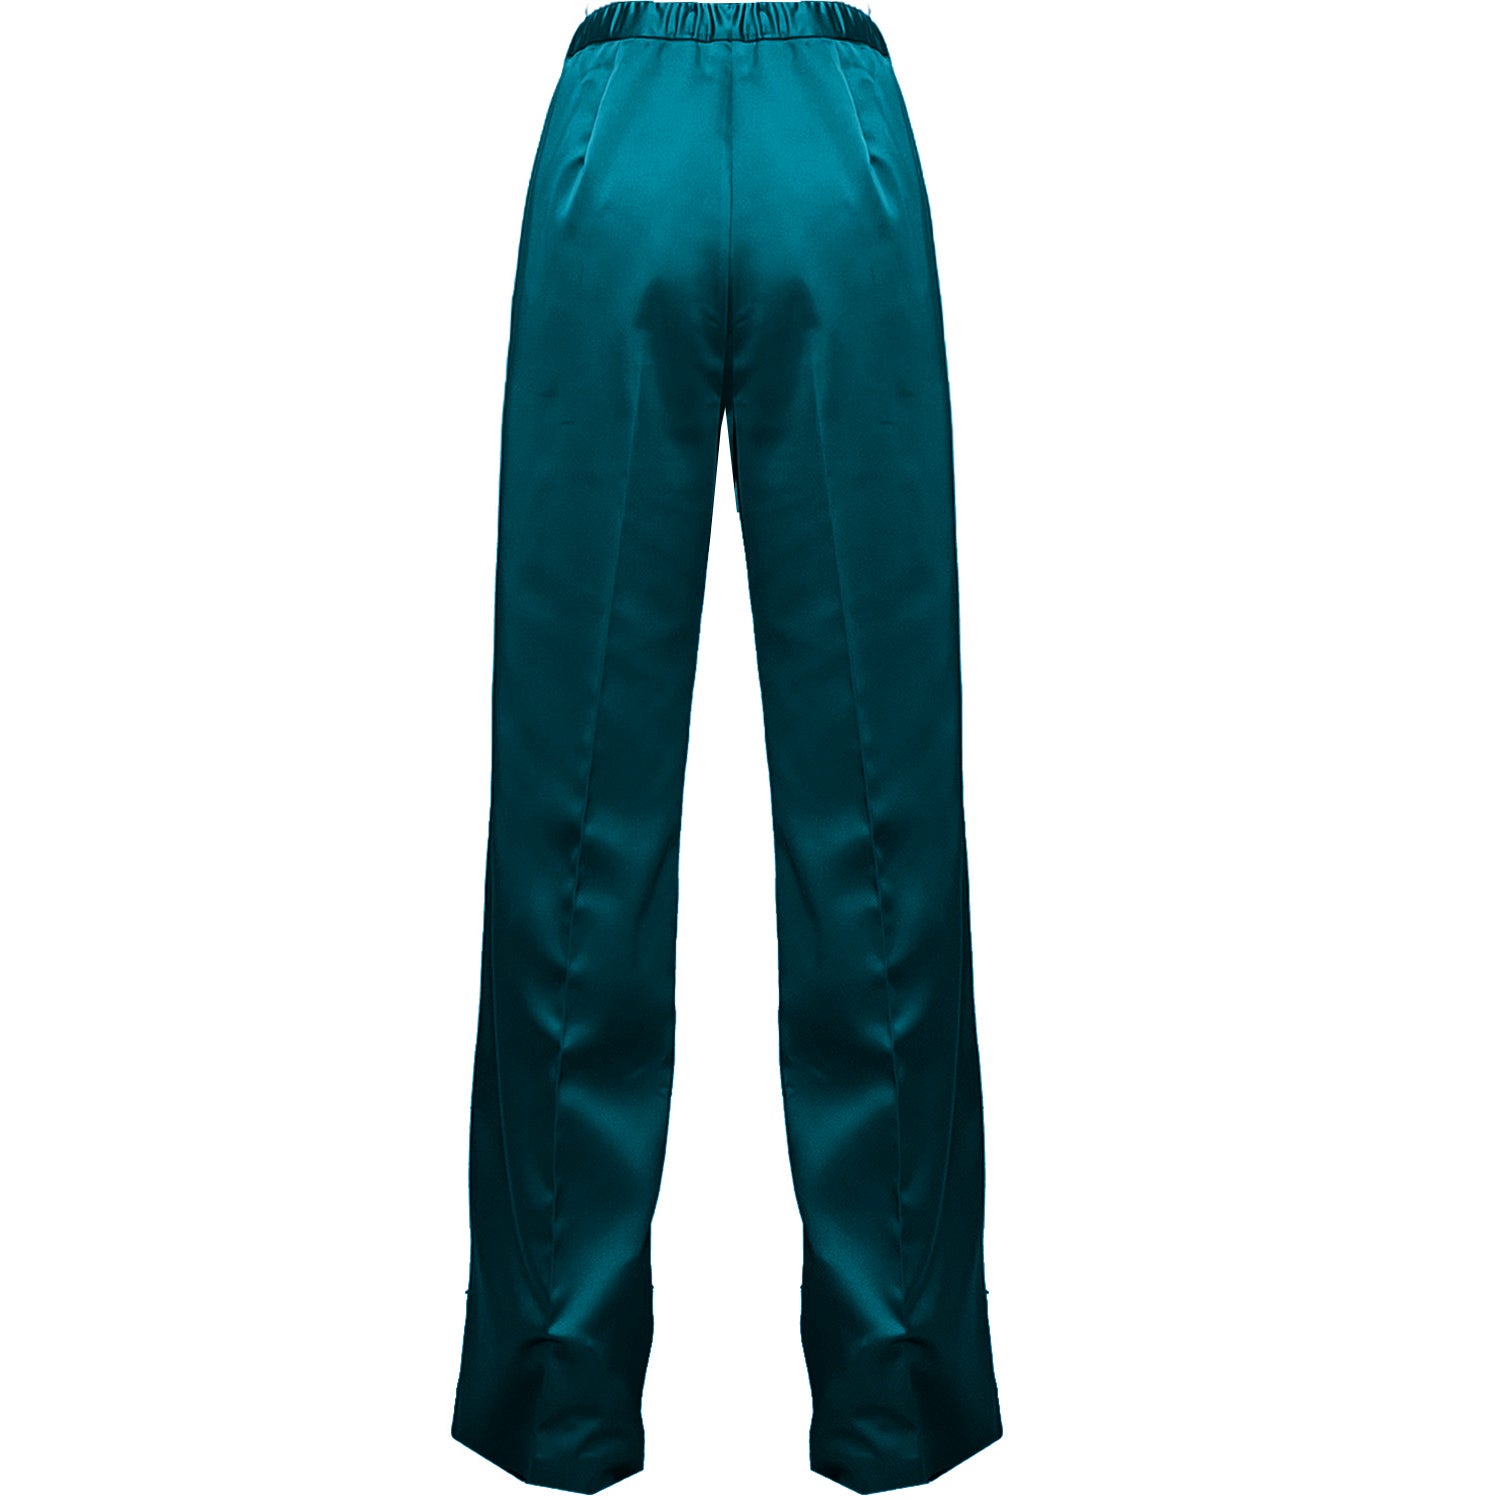 Rothko Collection Petroleum Pants